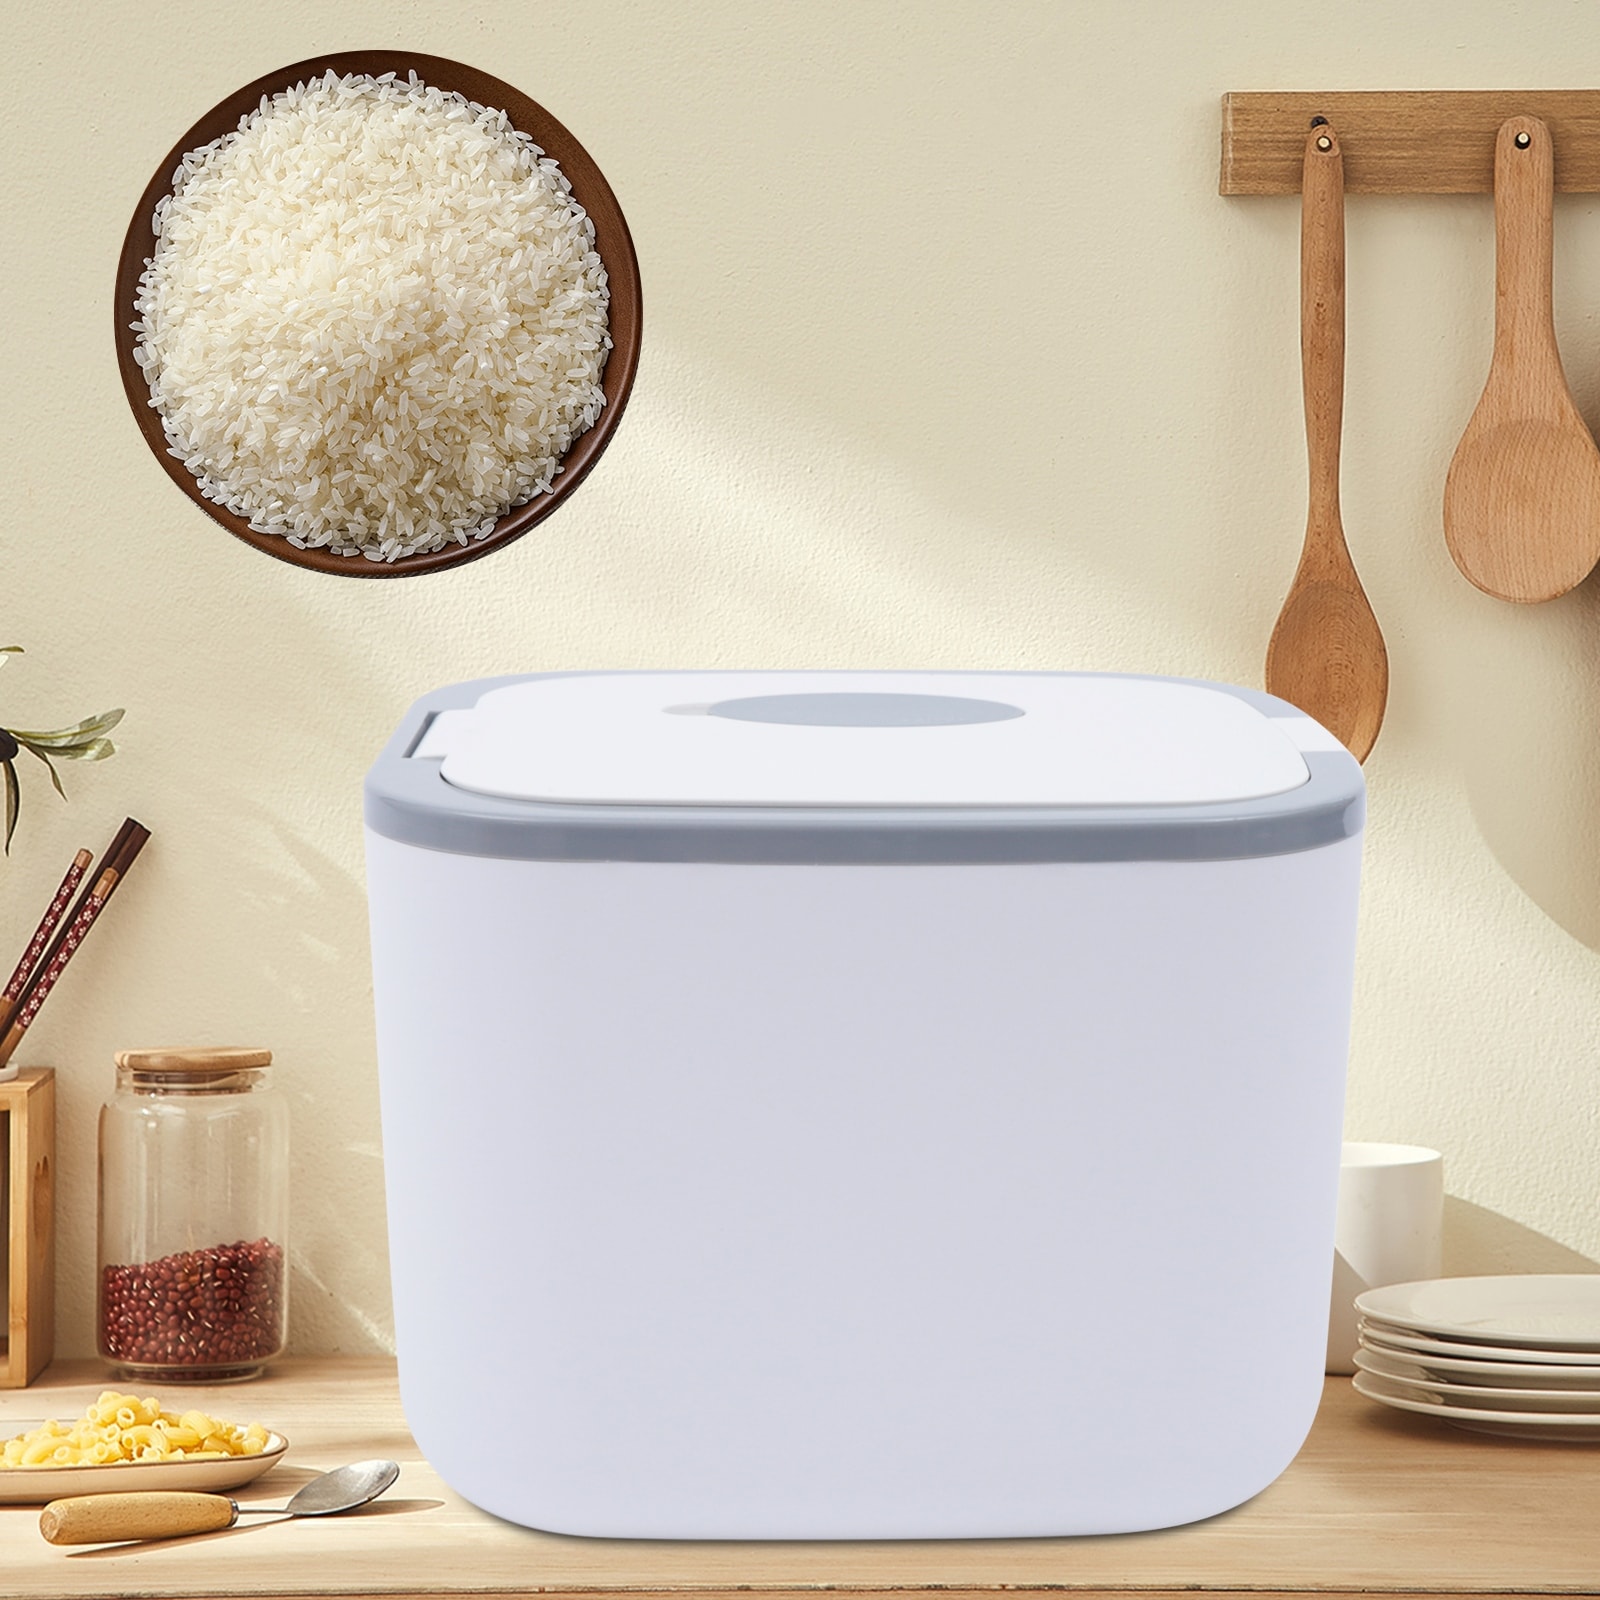 https://ak1.ostkcdn.com/images/products/is/images/direct/a69487e57d86768025d4b95b4659e33c0a6d9c78/Airtight-Rice-Dispenser-22-Lbs-Automatic-Flip-Cover-Food-Storage-Container.jpg